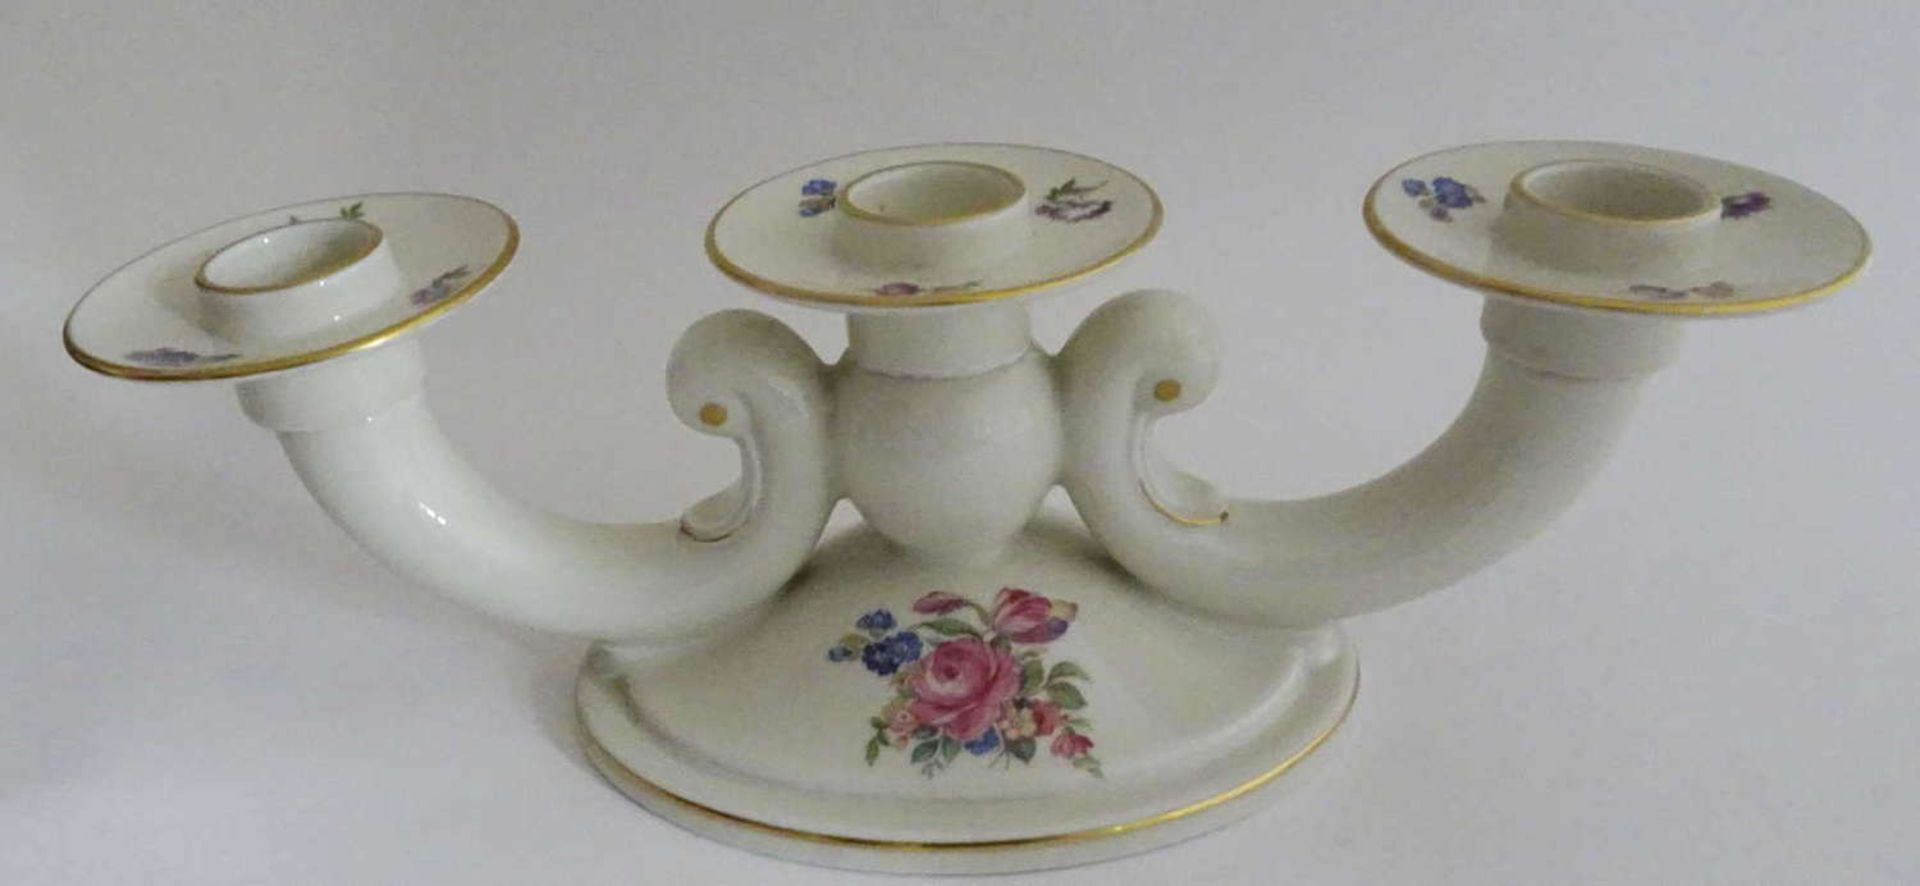 Rosenthal candle holder 3 flames with floral decoration, height about 11 cm, width about 30cm